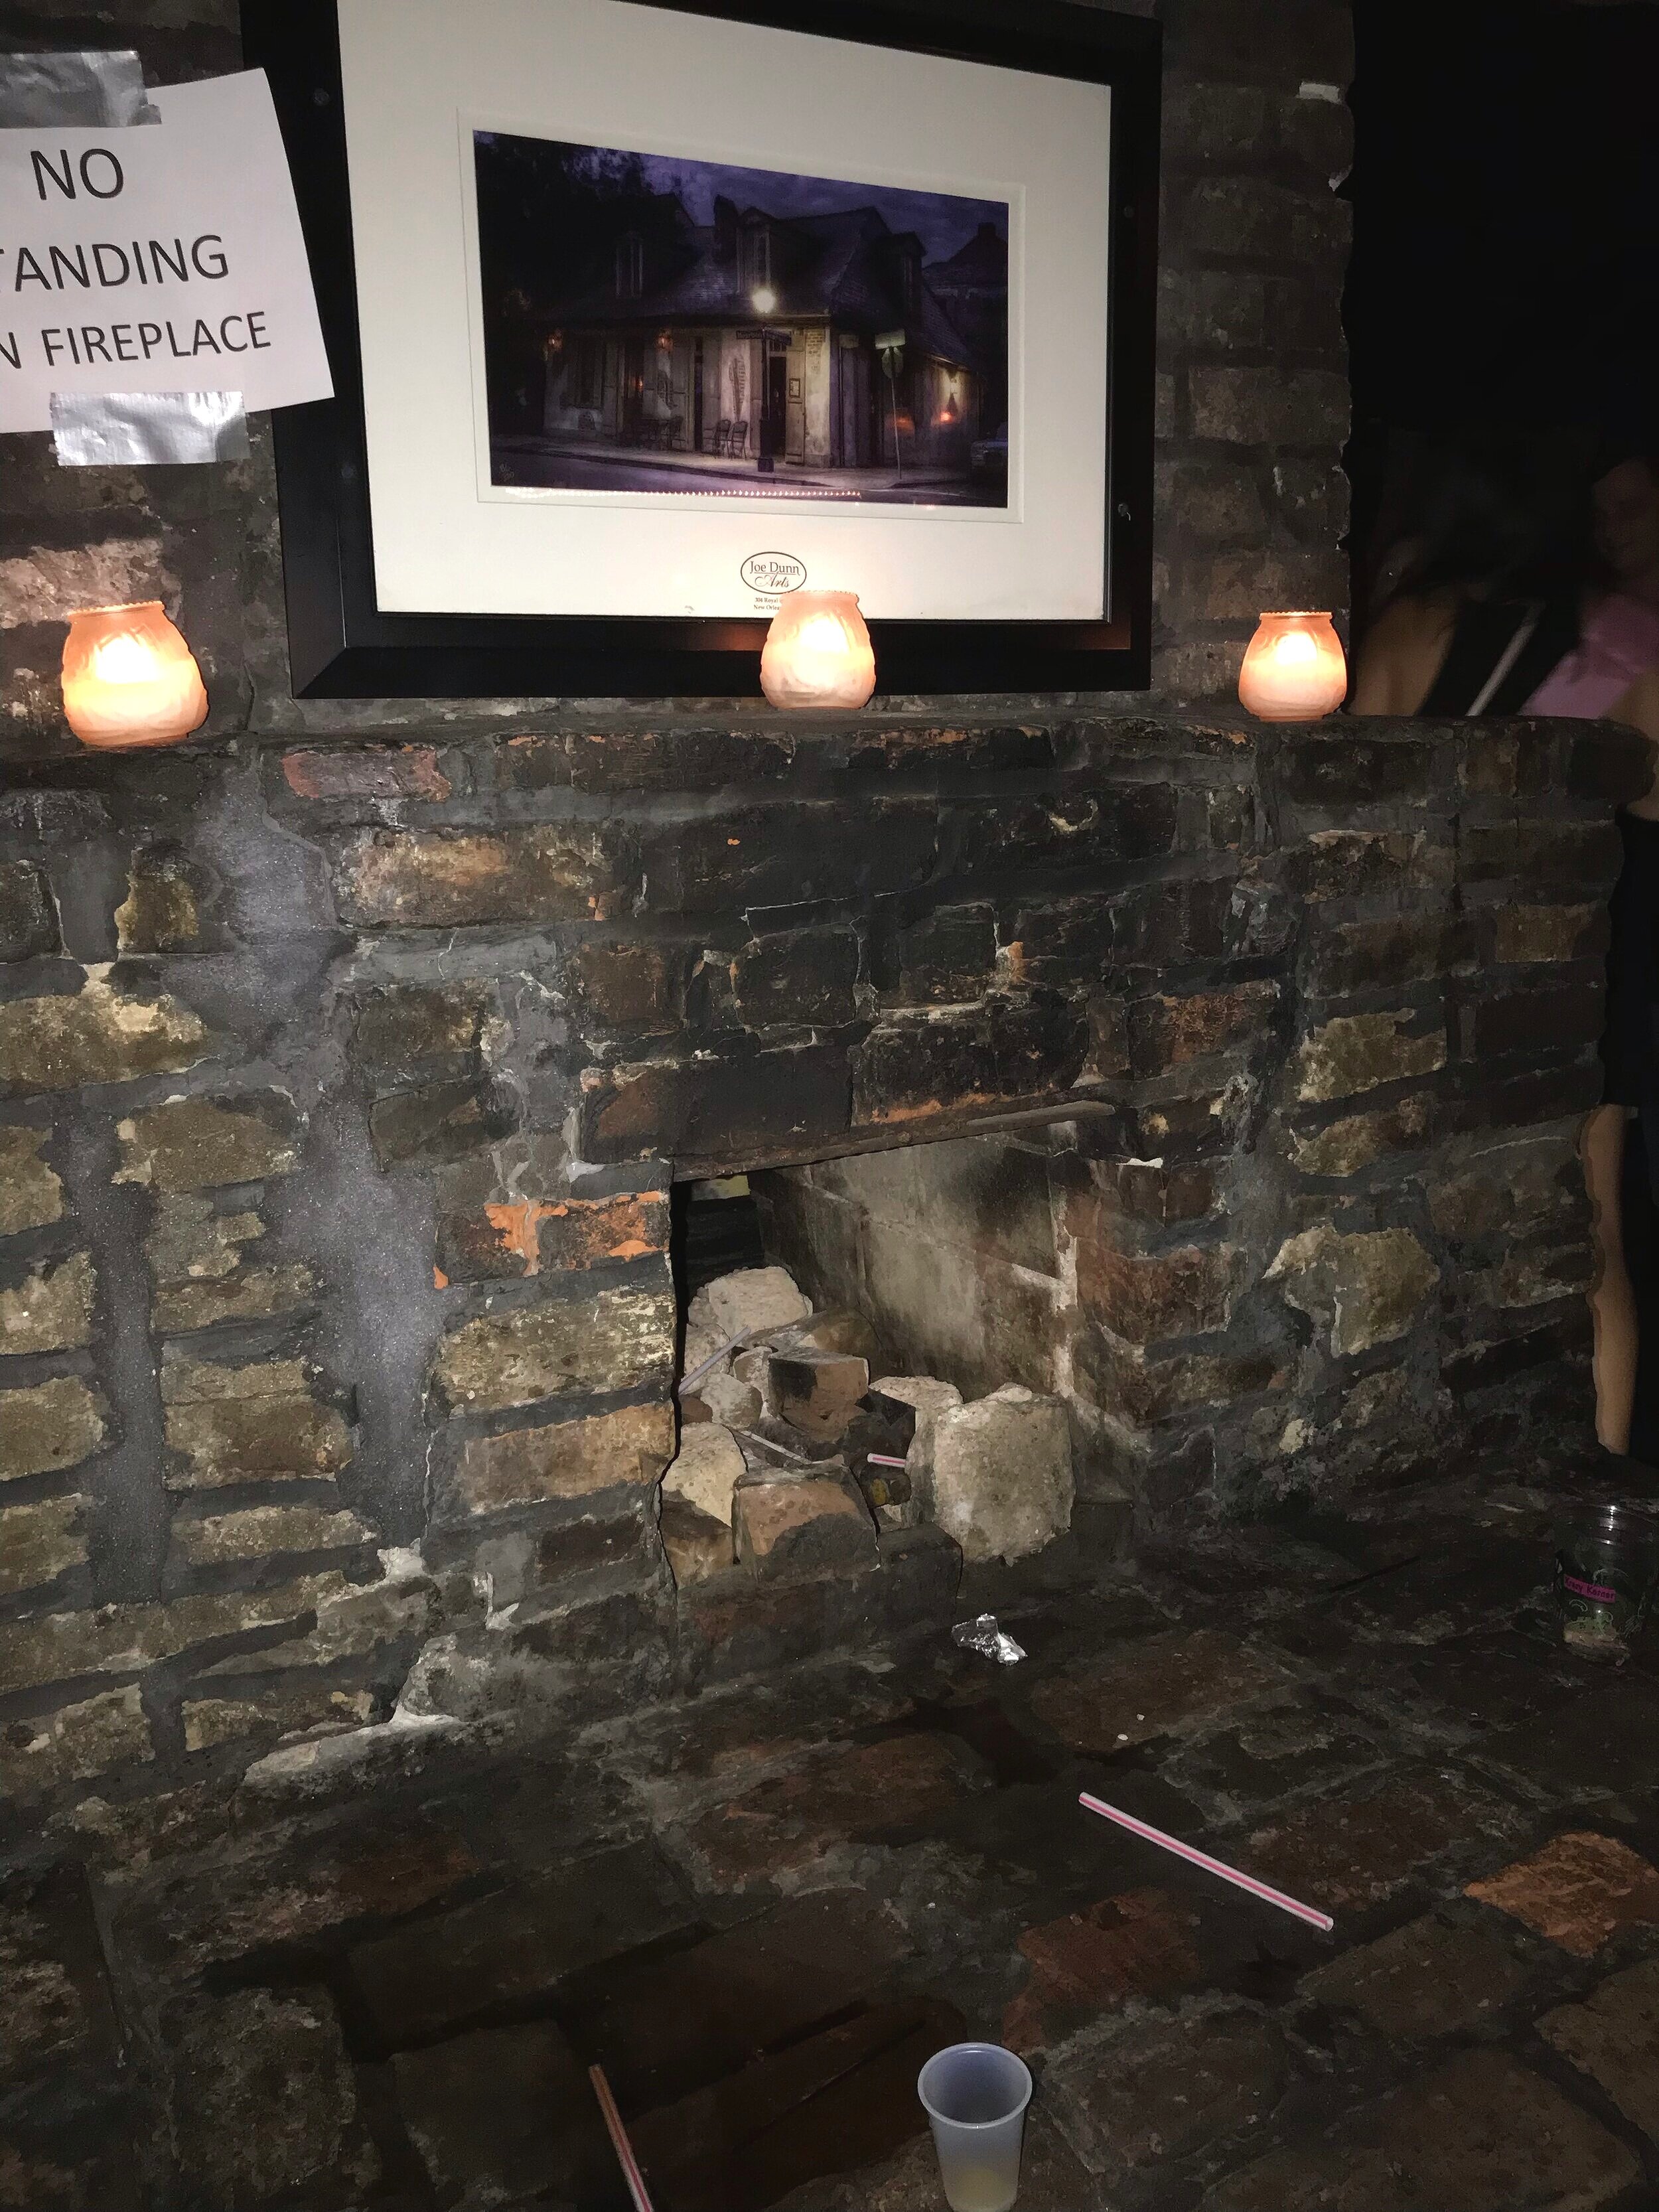  The notorious fireplace at  Lafitte’s Blacksmith Shop Bar in New Orleans , where some have said a pair of glowing red eyes have stared back at them while seated at the tables near it. 